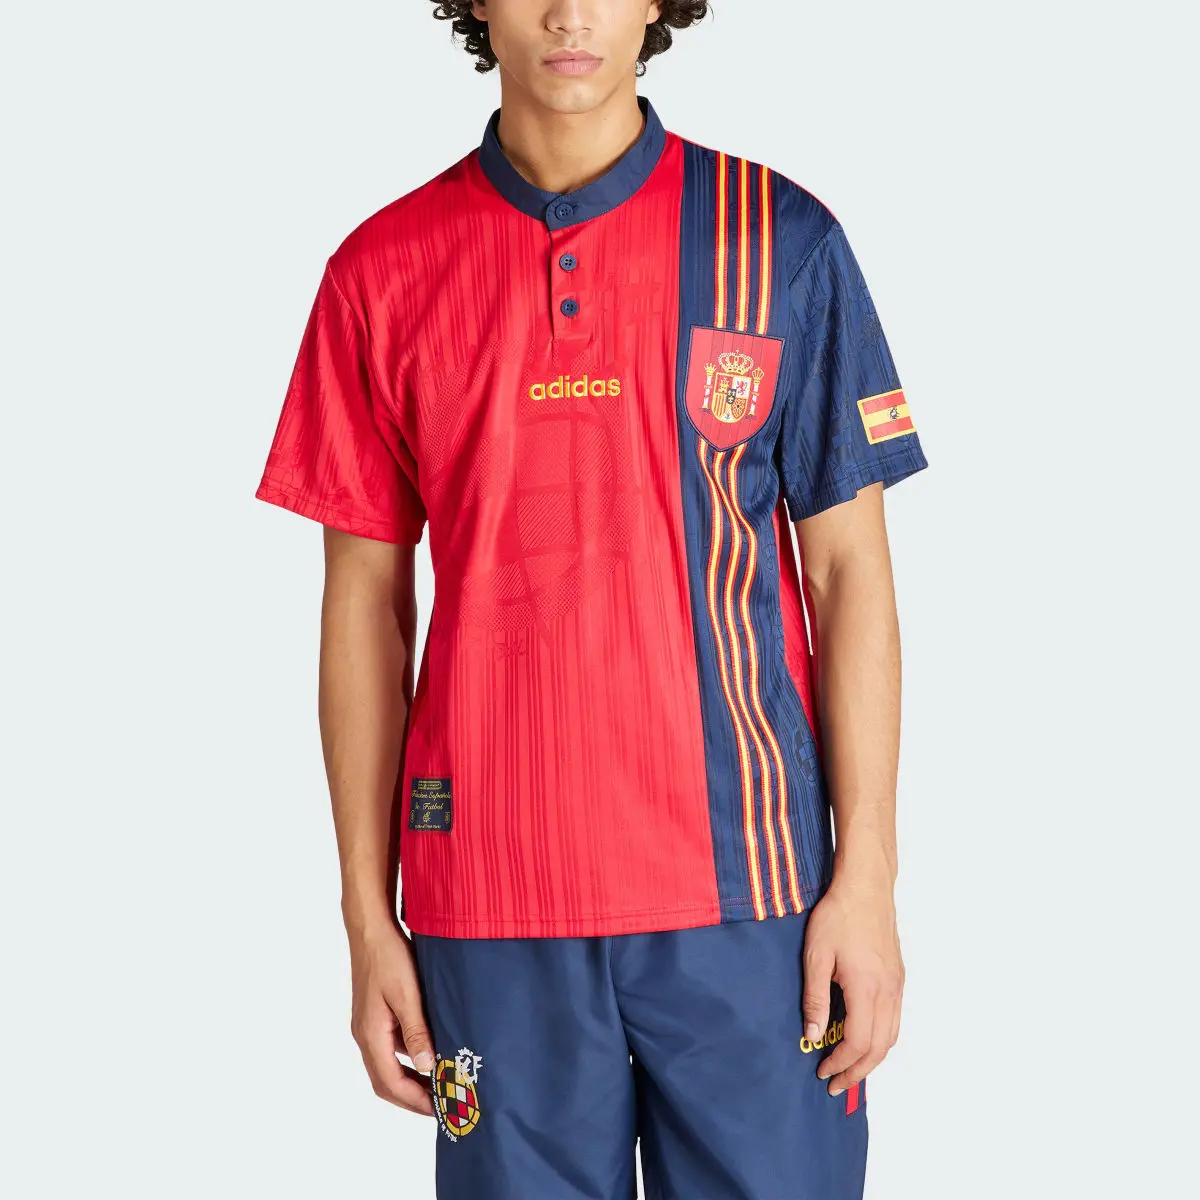 Adidas Spain 1996 Home Jersey. 1